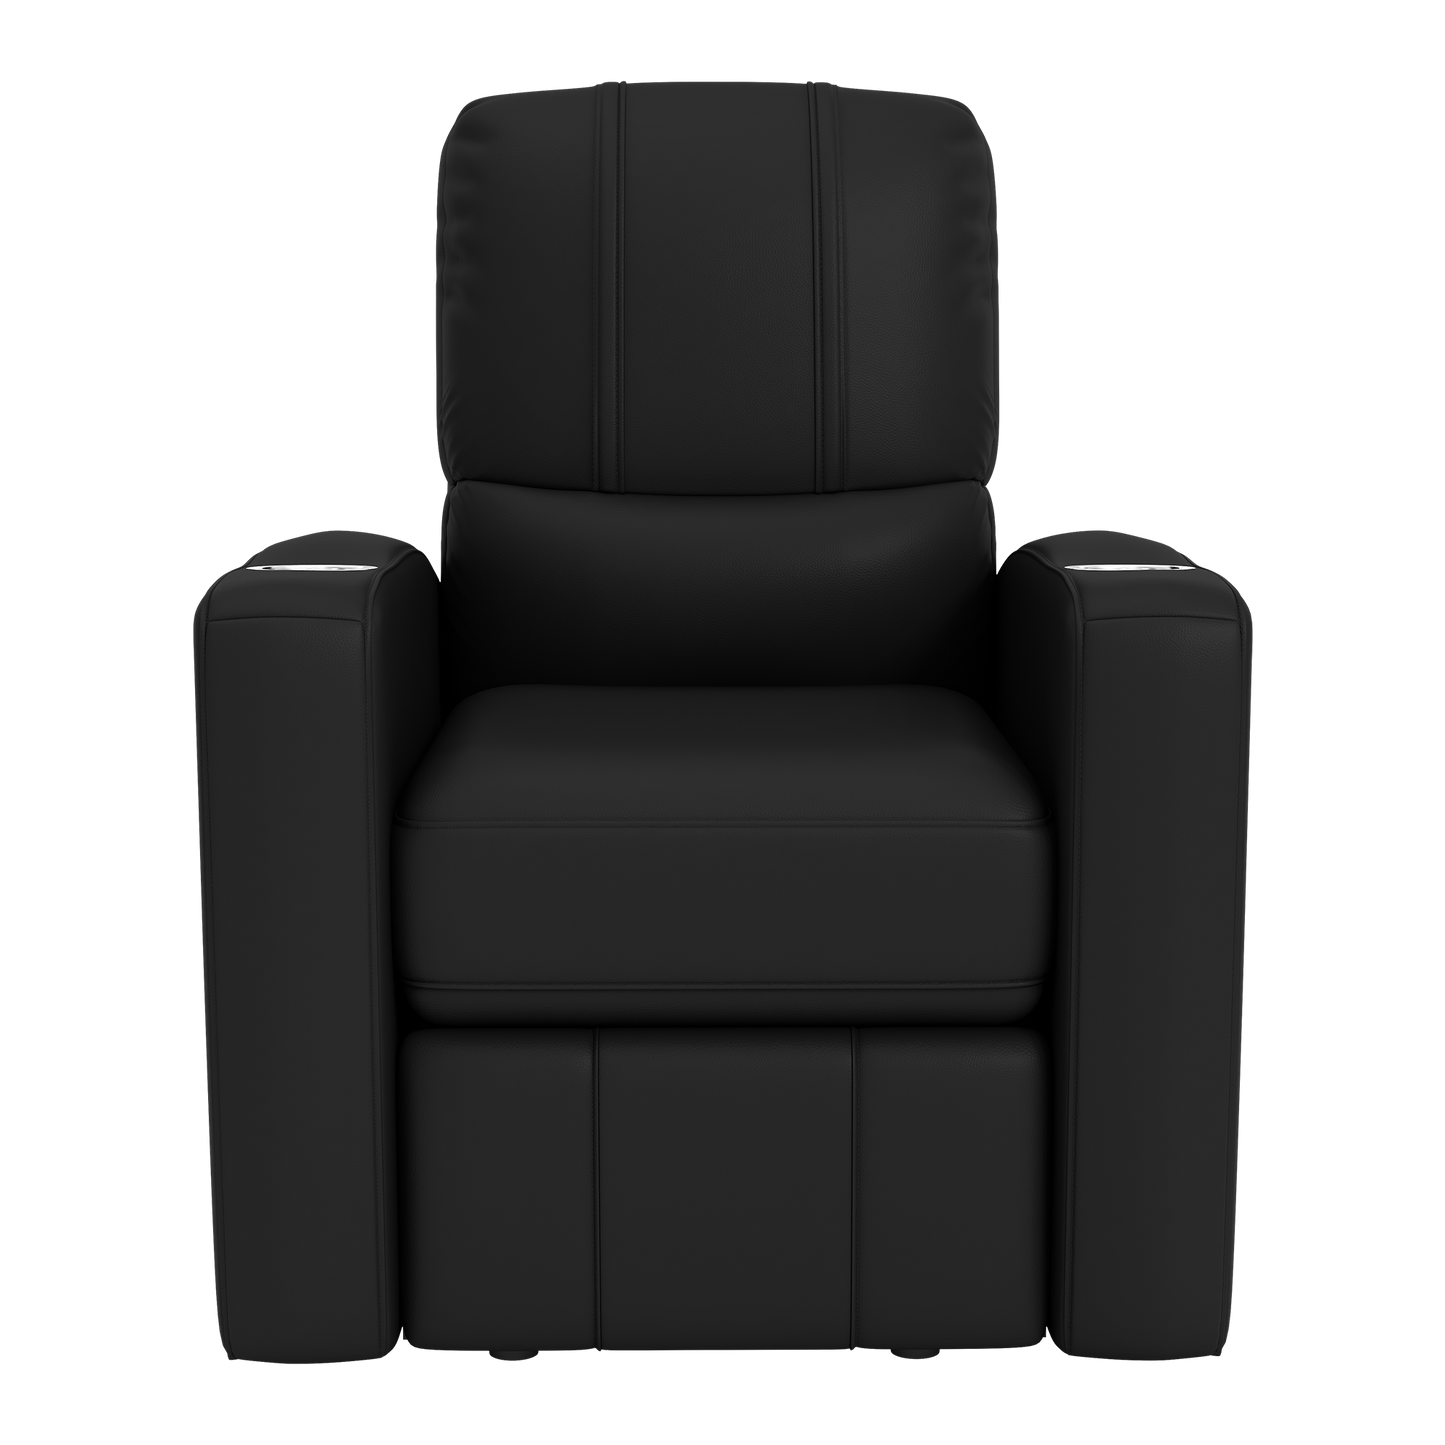 Stealth Recliner with UNC Wilmington Alternate Logo